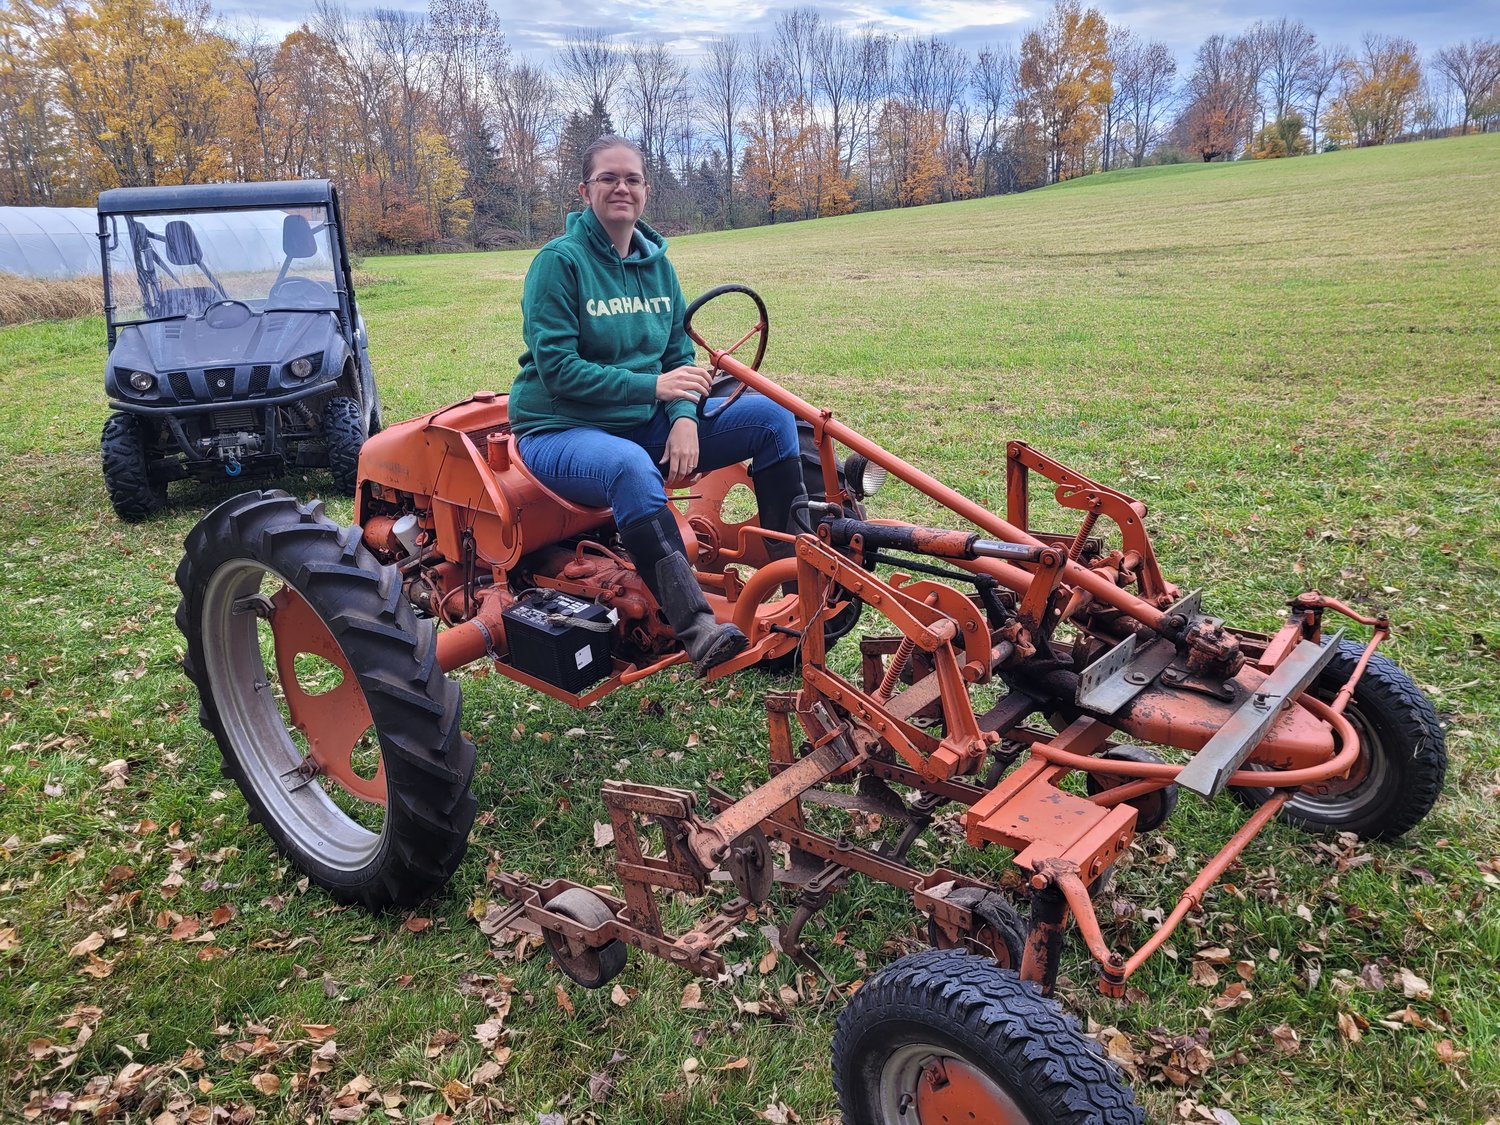 My wife looks good on our new Model G by Allis Chalmers.